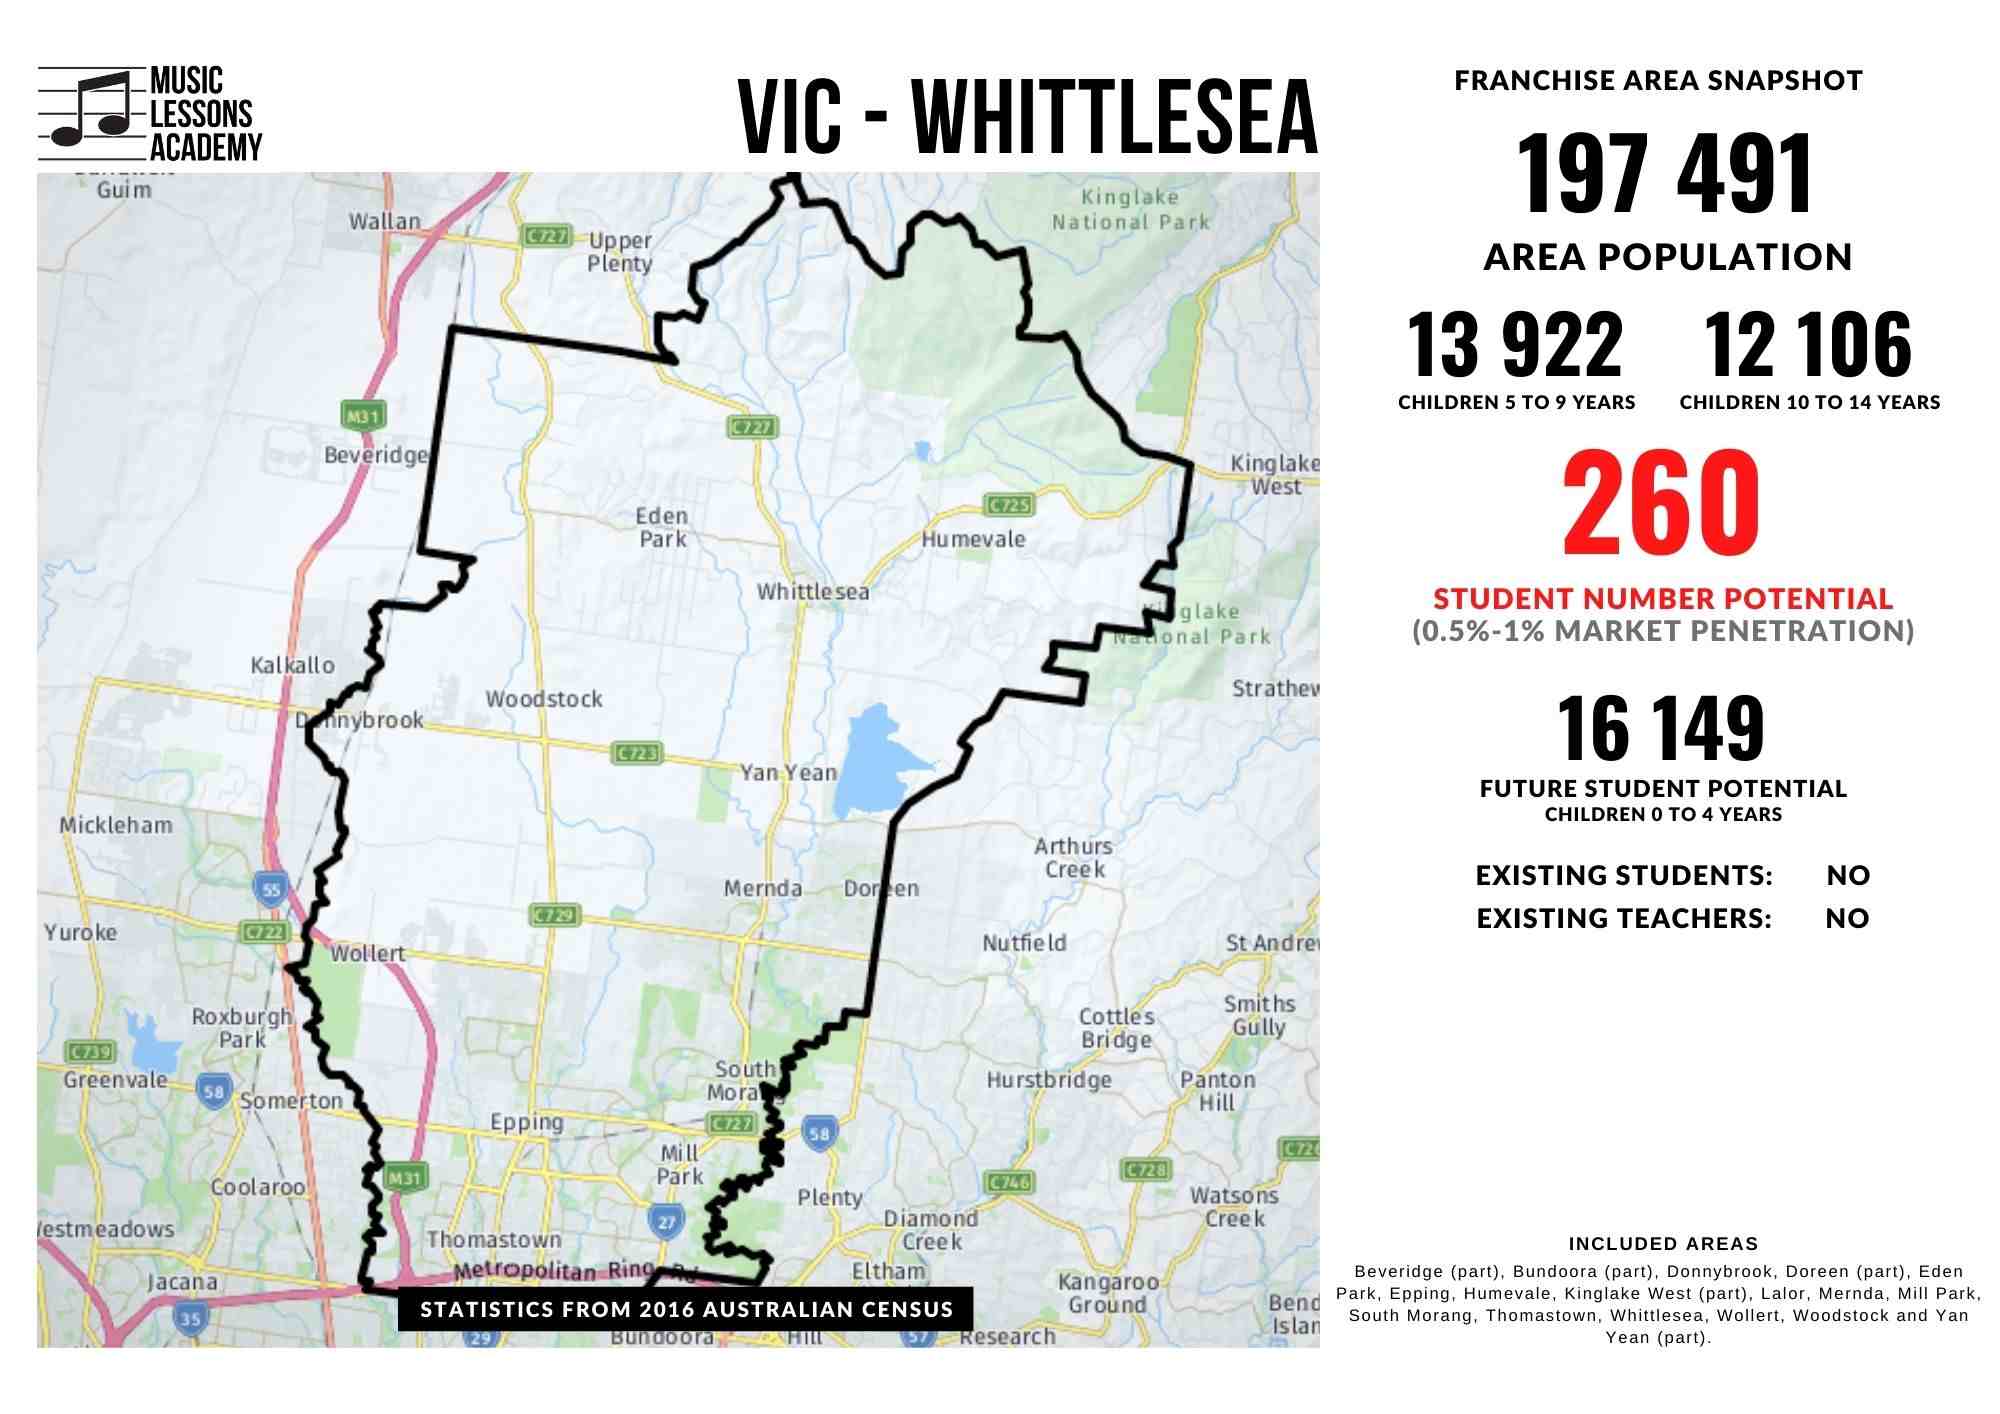 VIC Whittlesea Epping Franchise for sale